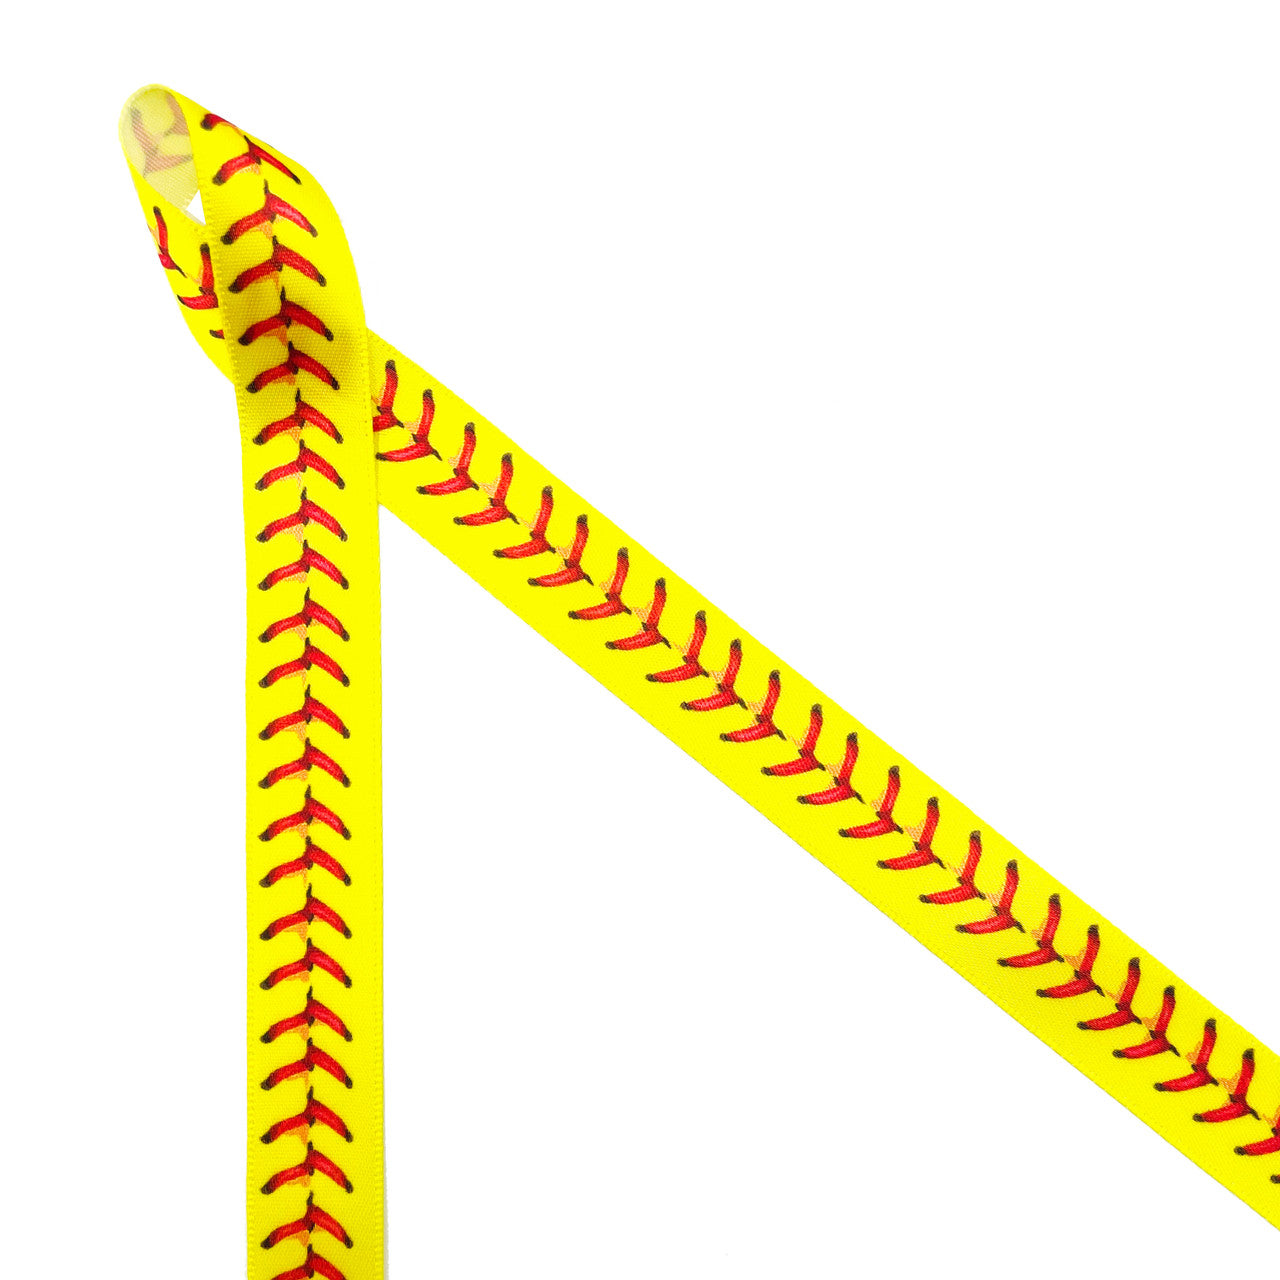 Softball ribbon red softball stitches on a bright yellow background printed on 5/8" white single face satin